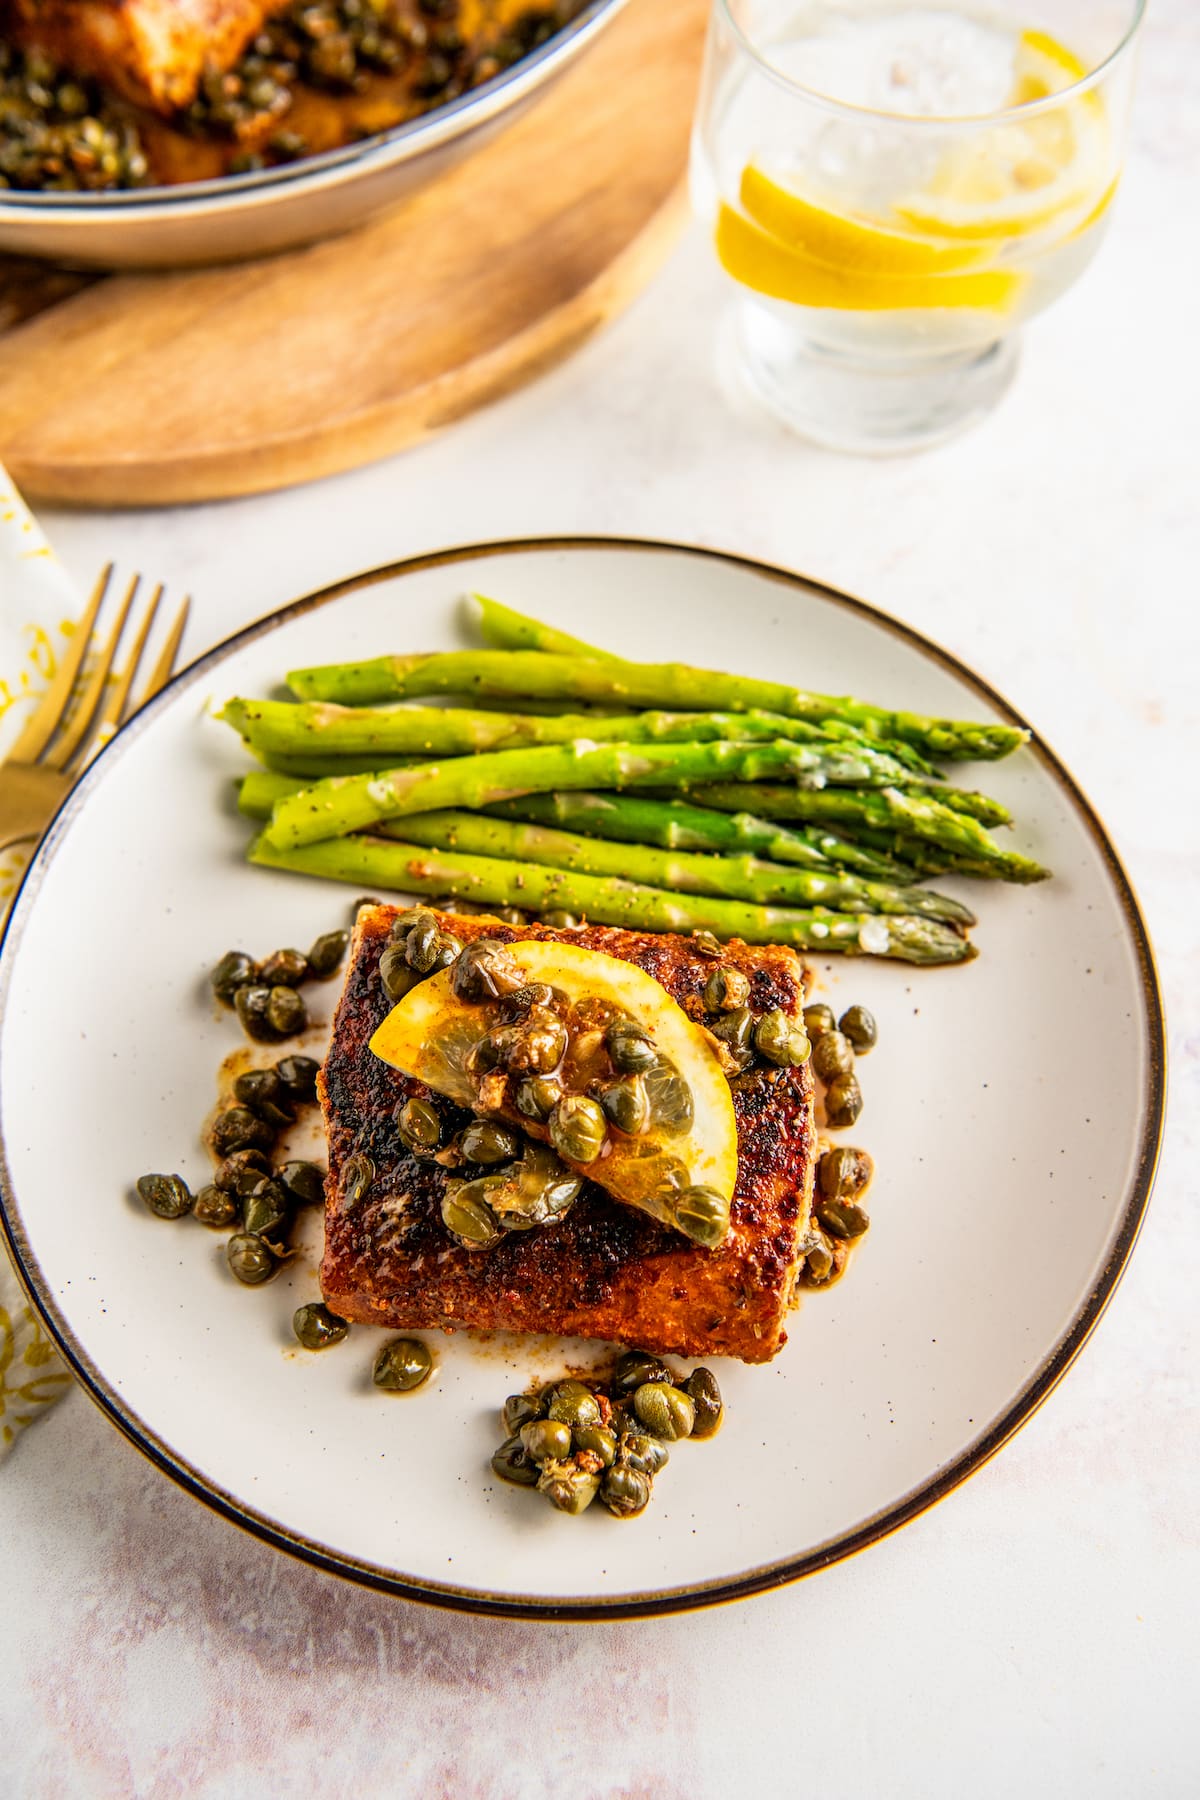 Overhead view of a plate of seared mahi mahi topped with lemon and capers, next to asparagus